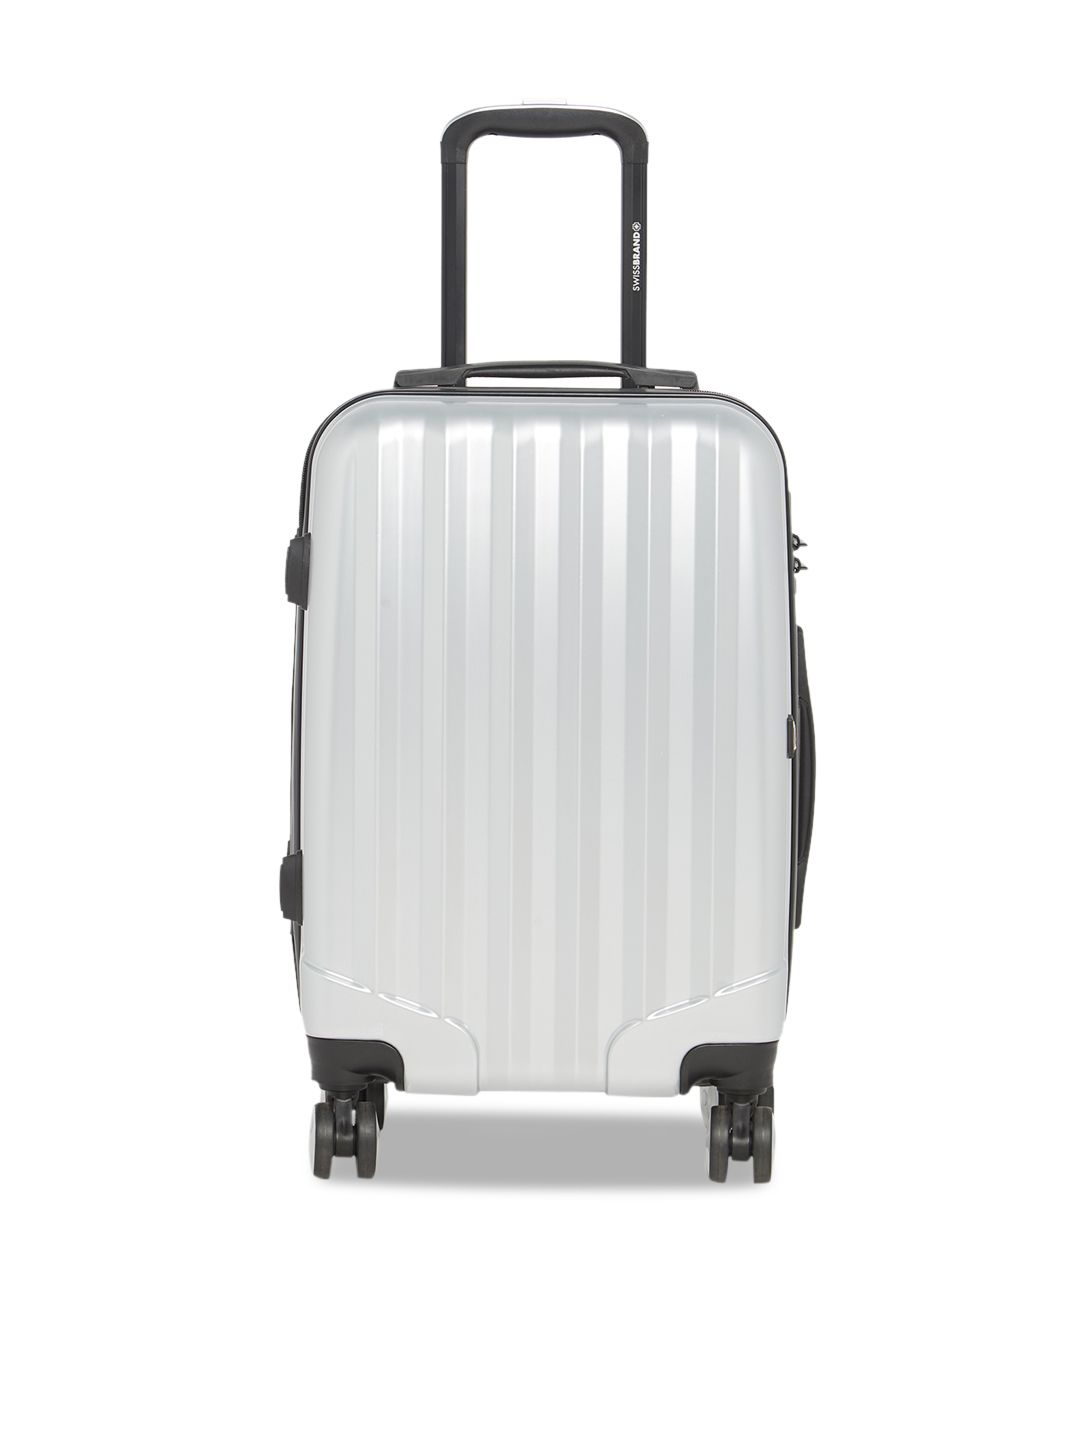 SWISS BRAND Silver-Toned Solid BADEN 360-Degree Rotation Hard-Sided Cabin Trolley Suitcase Price in India